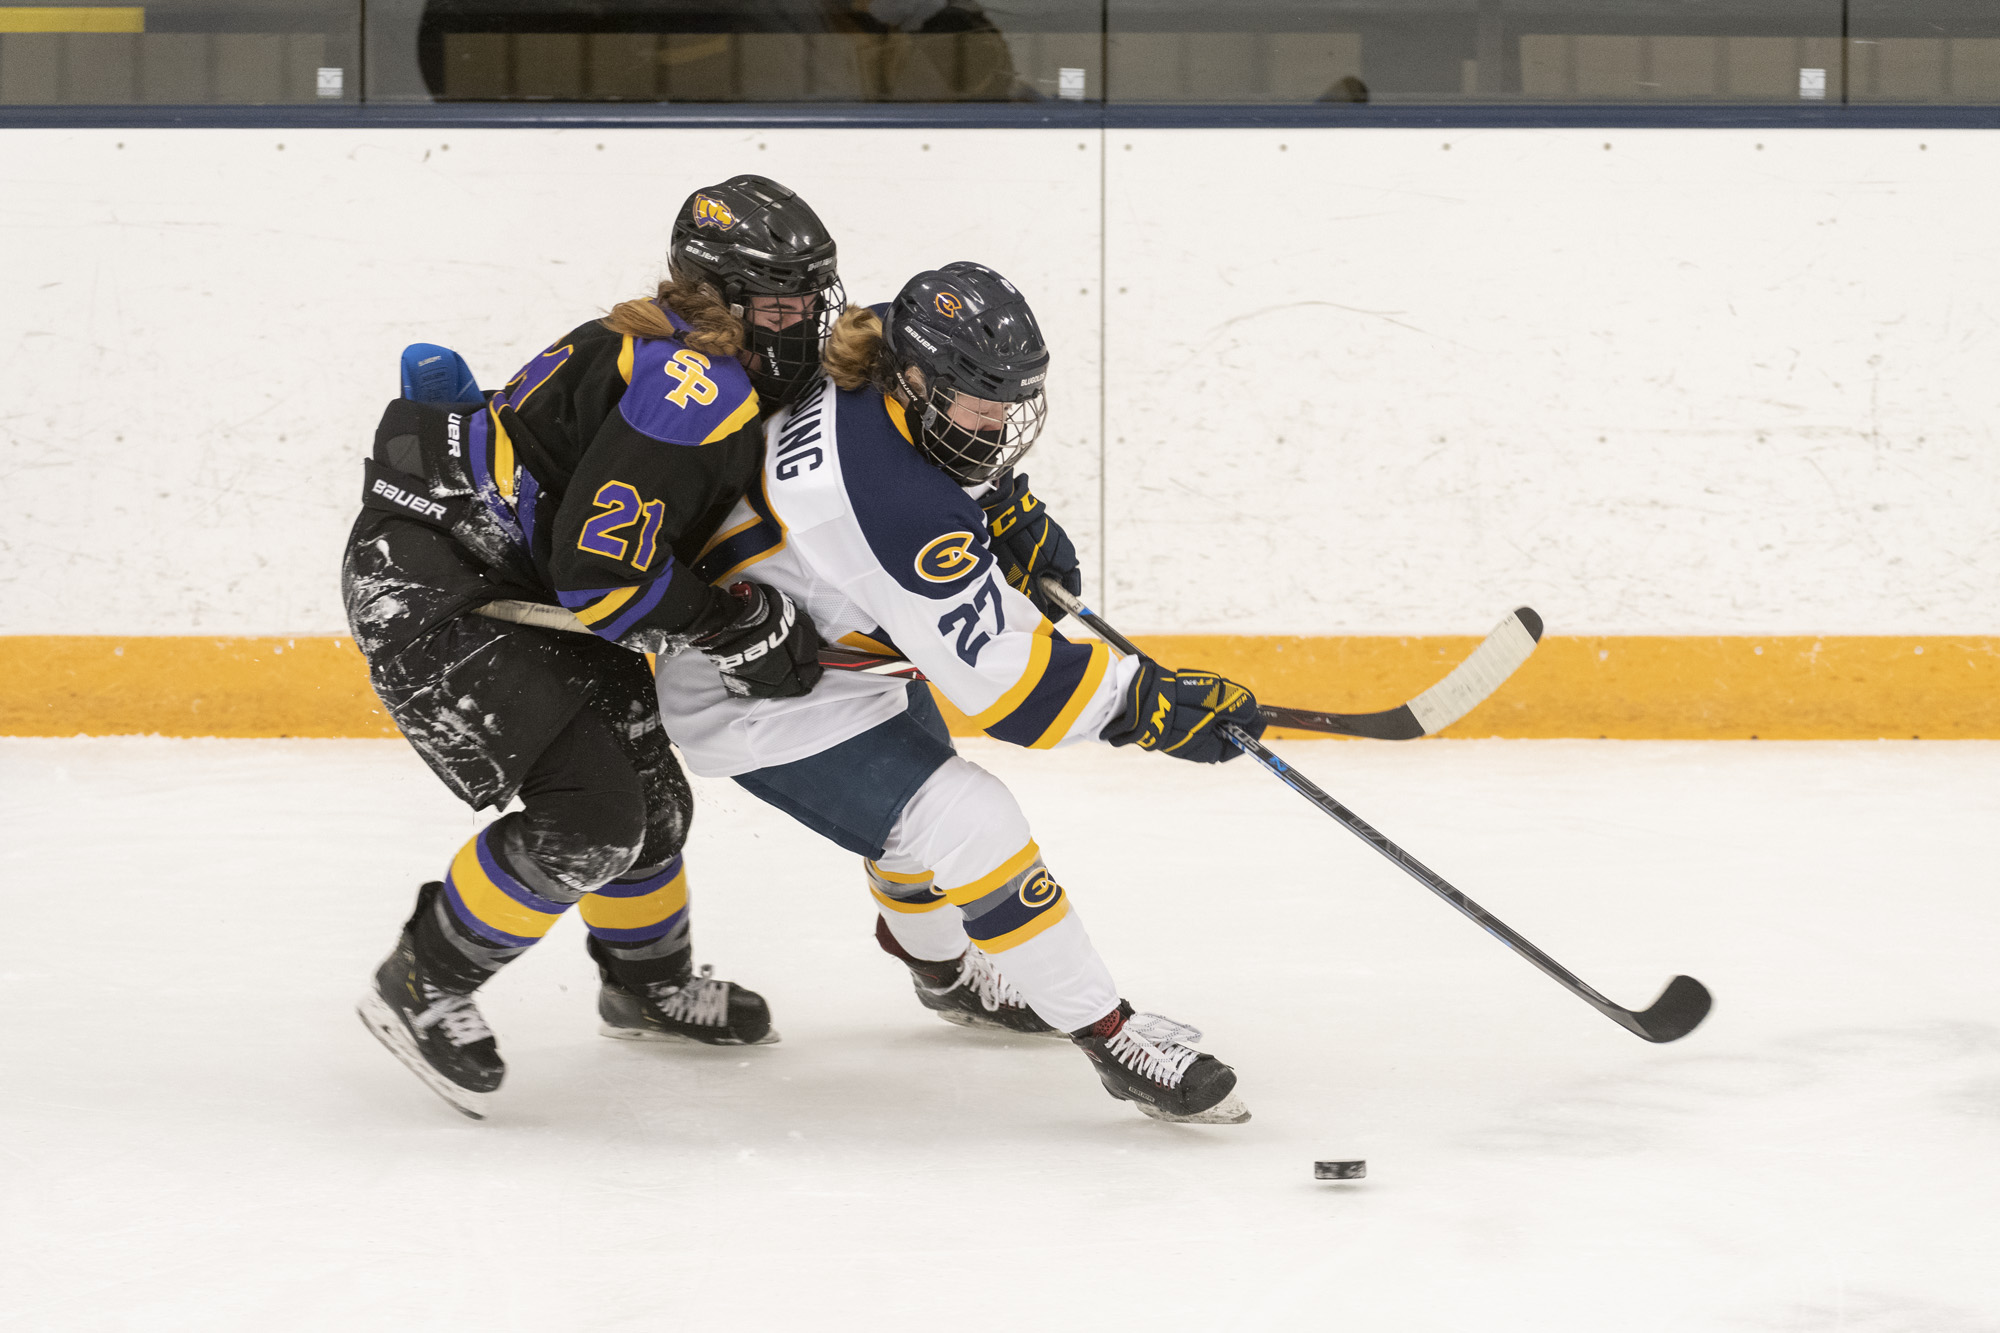 Blugold offense shines on the road against the Jills